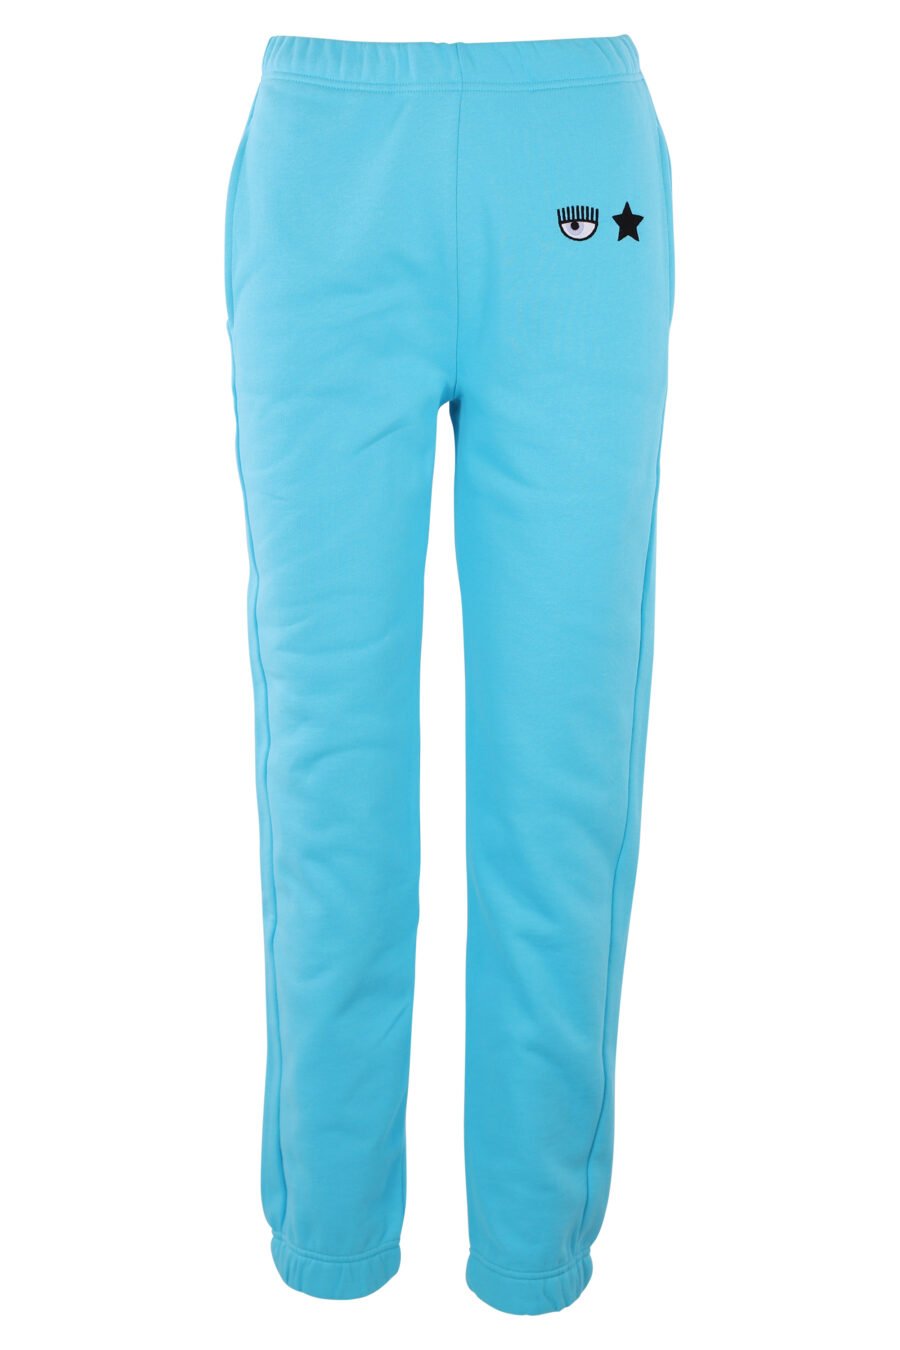 Tracksuit bottoms sky blue with eye and star logo - IMG 6330